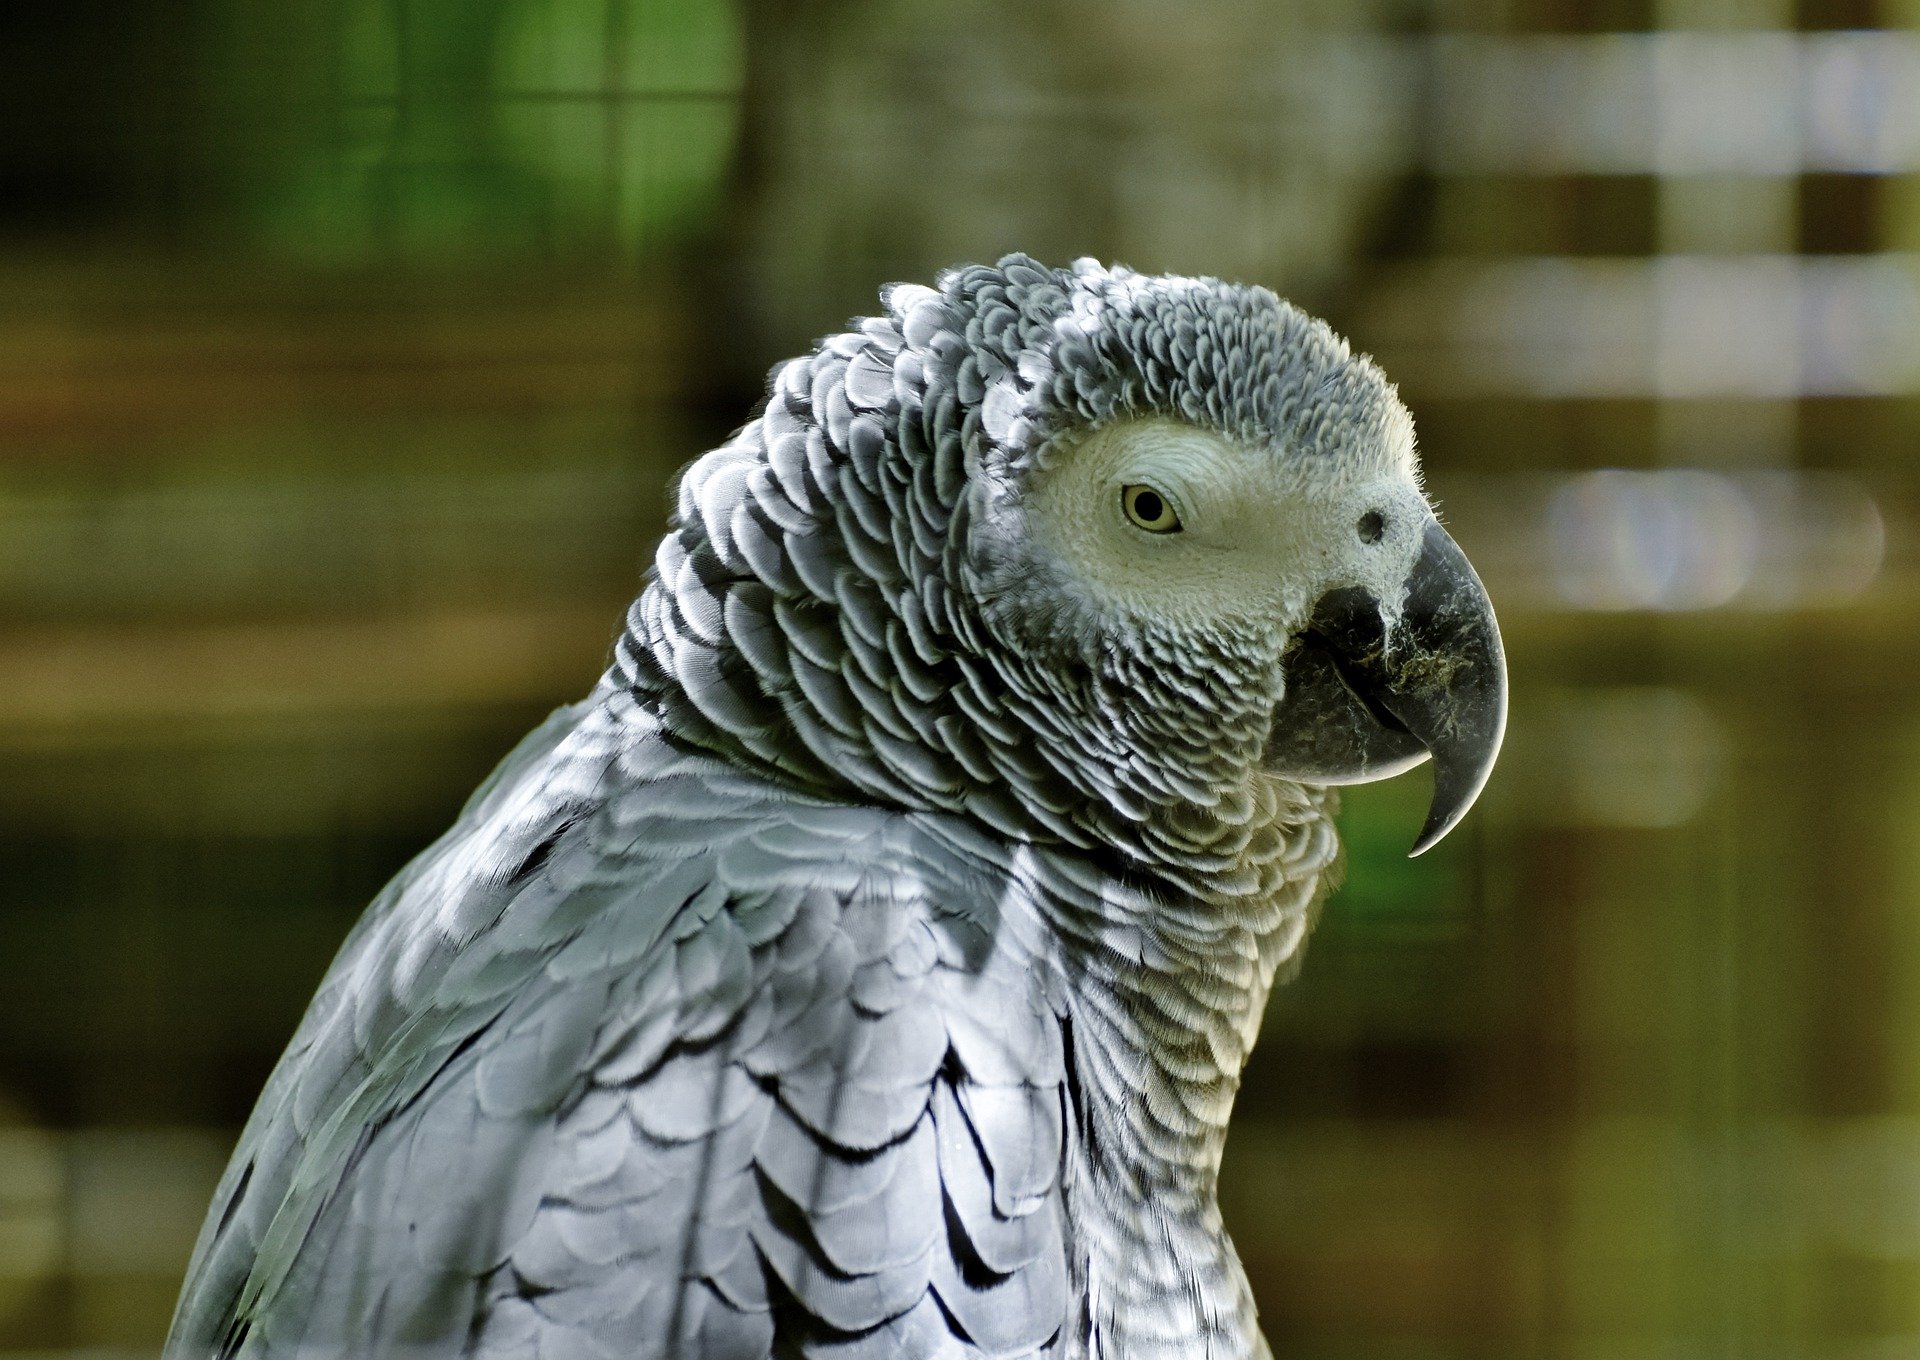 A close-up picture of an African Grey parrot. | Source: Pixabay.